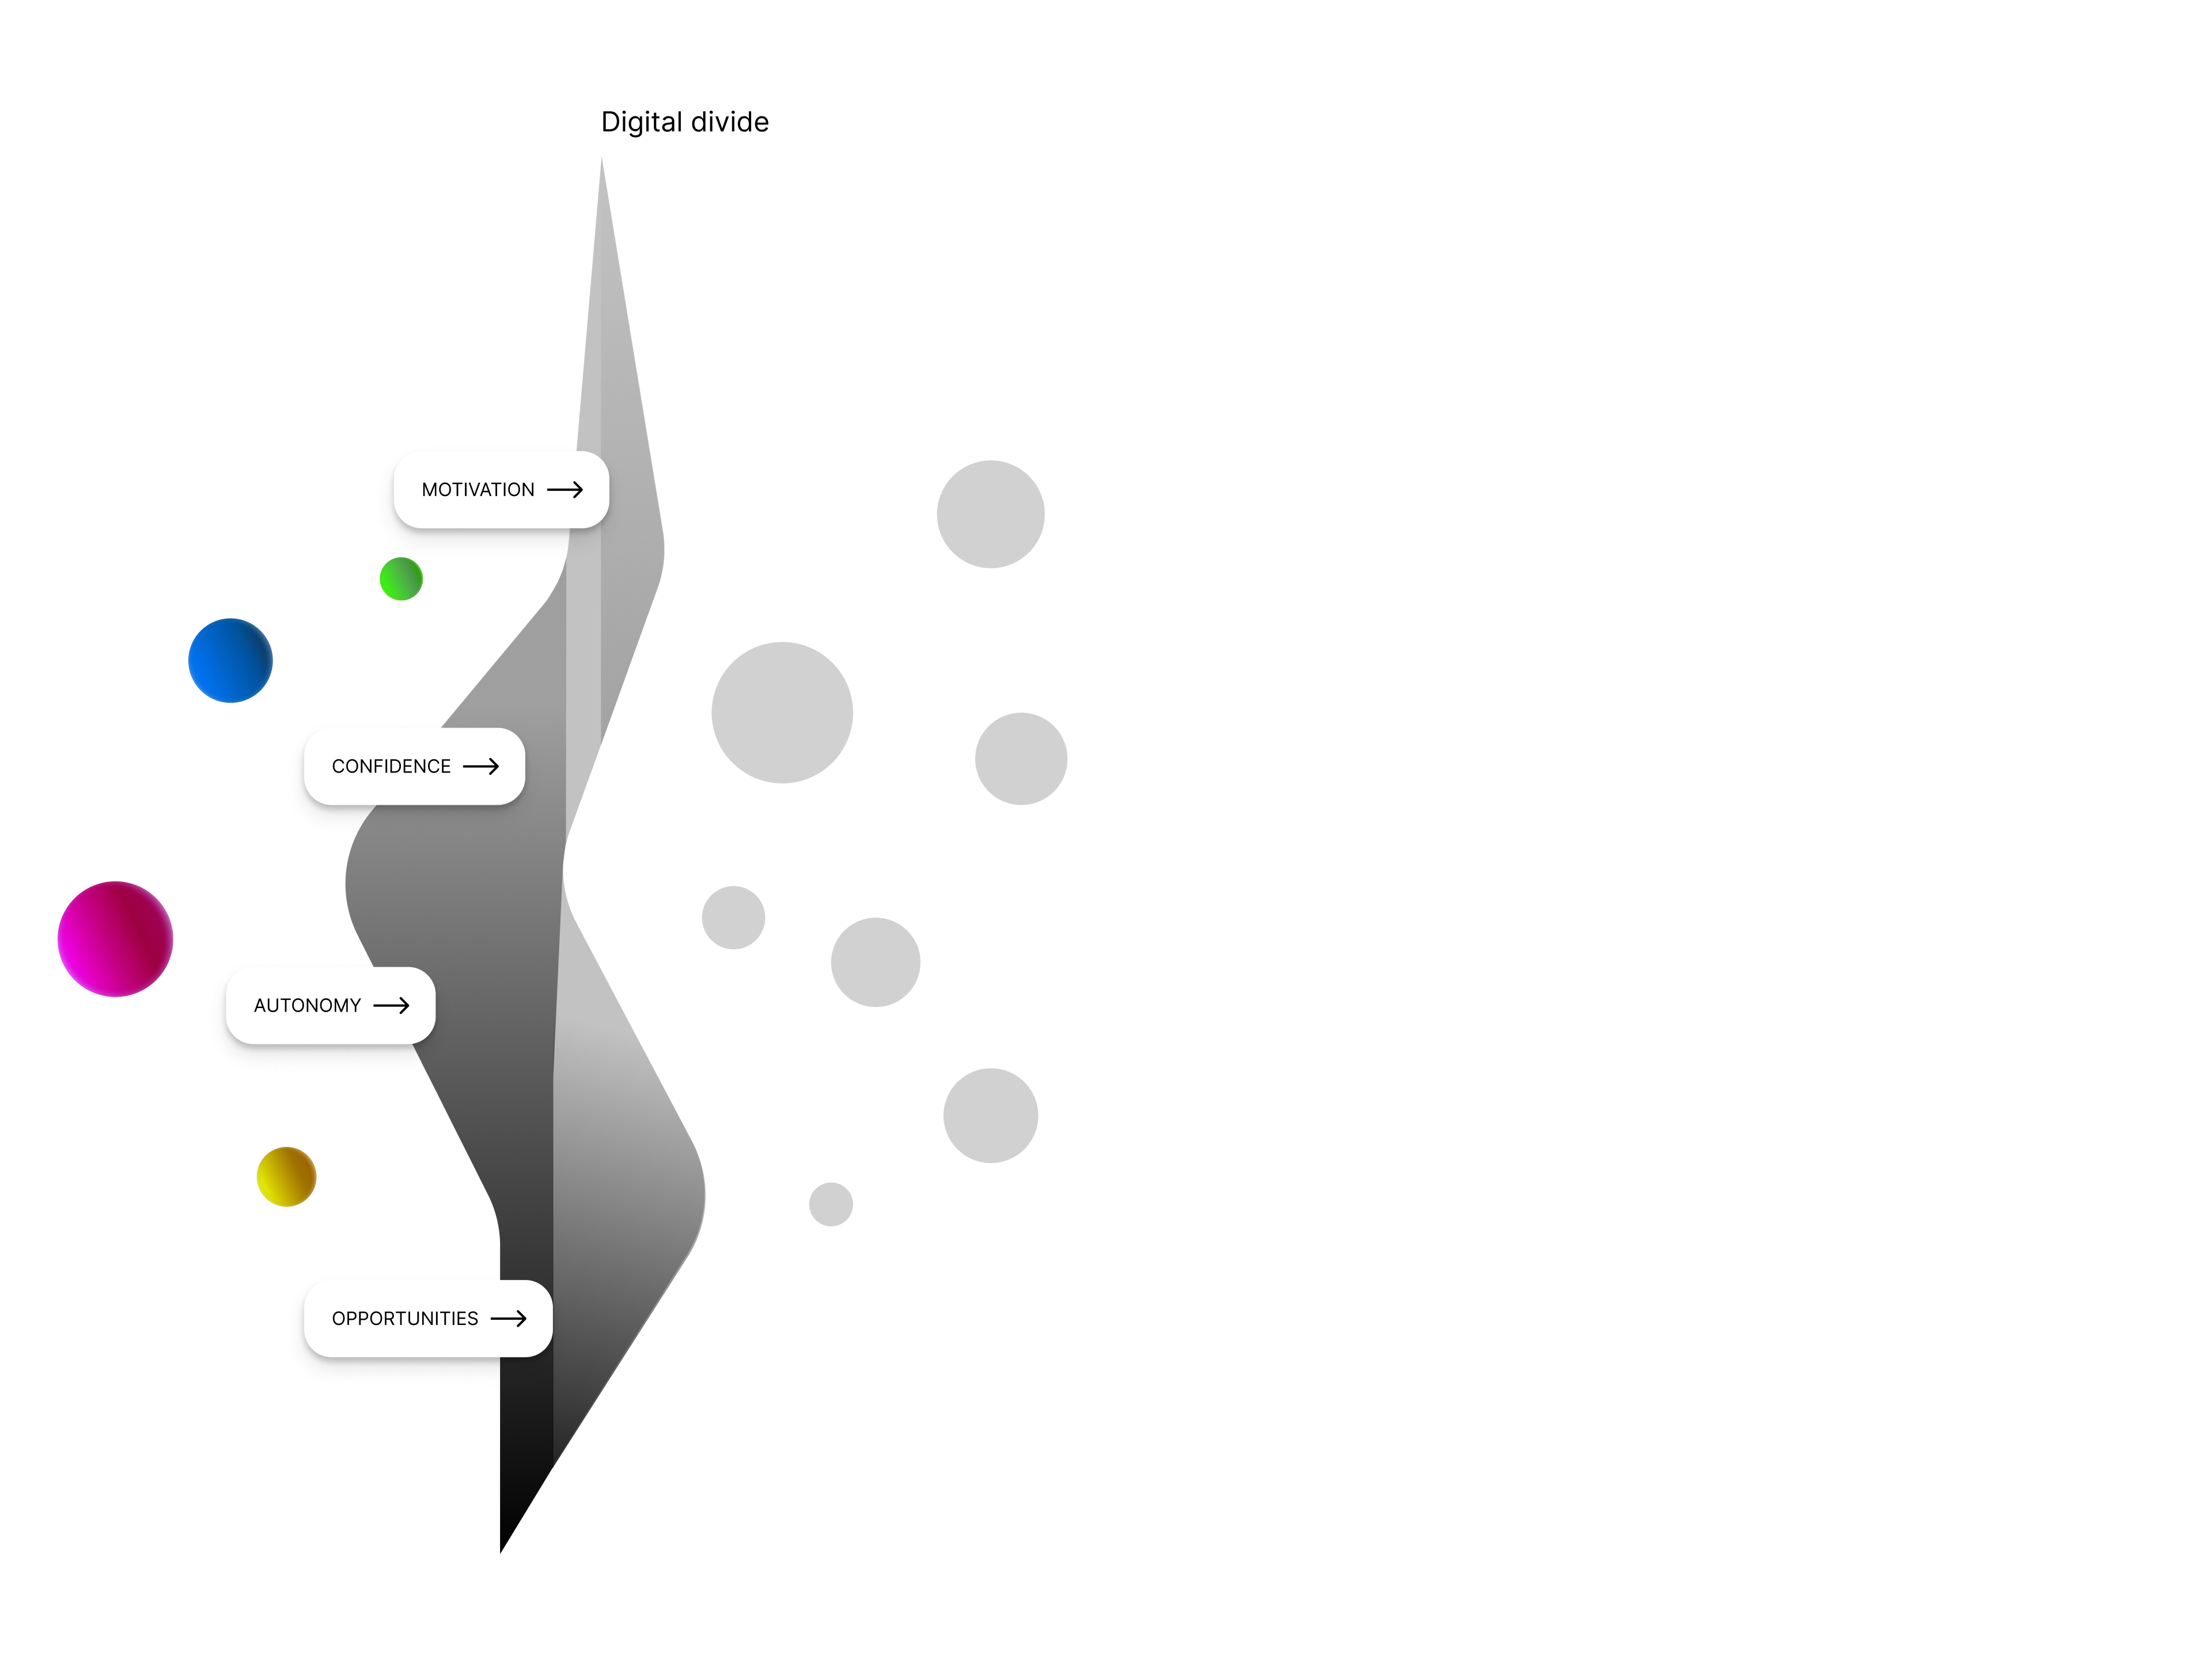 The image represents the digital divide. On one side are the coloured spheres, and on the other side, the gray spheres and water. The coloured spheres, representing excluded users, have labels next to them pointing towards the digital divide, which are titled: Motivation, confidence, autonomy, and opportunity. The gray spheres represent people who are not subject to digital exclusion. This image illustrates the problems that arise when the digital divide is too significant and limits users.